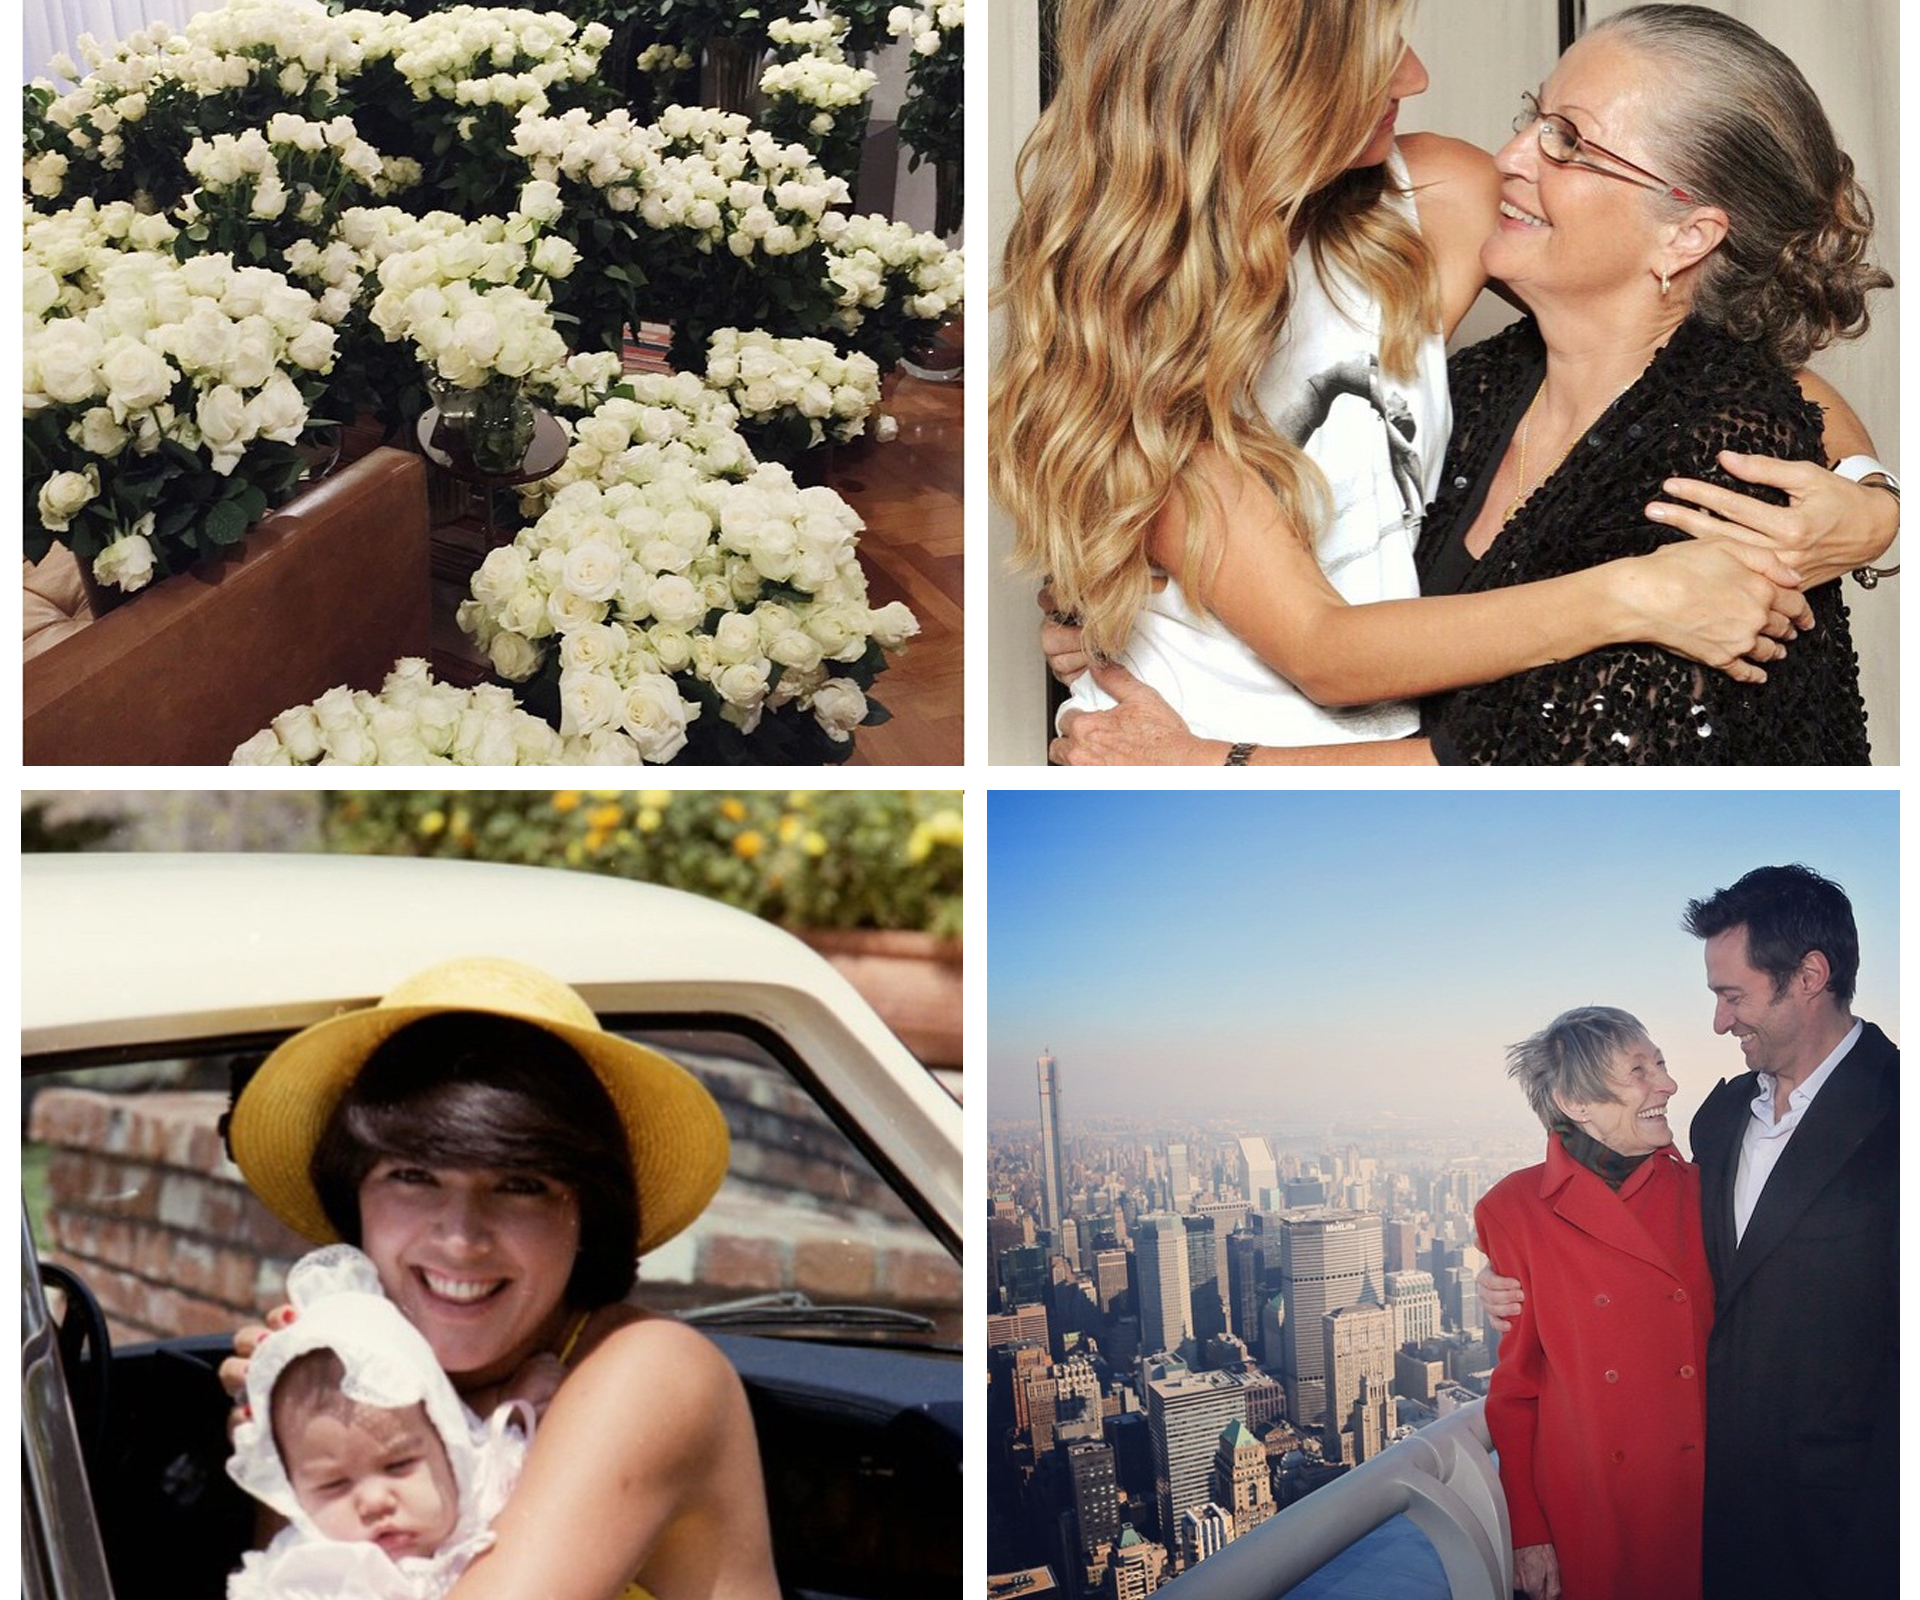 Sweet celebrity Mother’s Day tributes